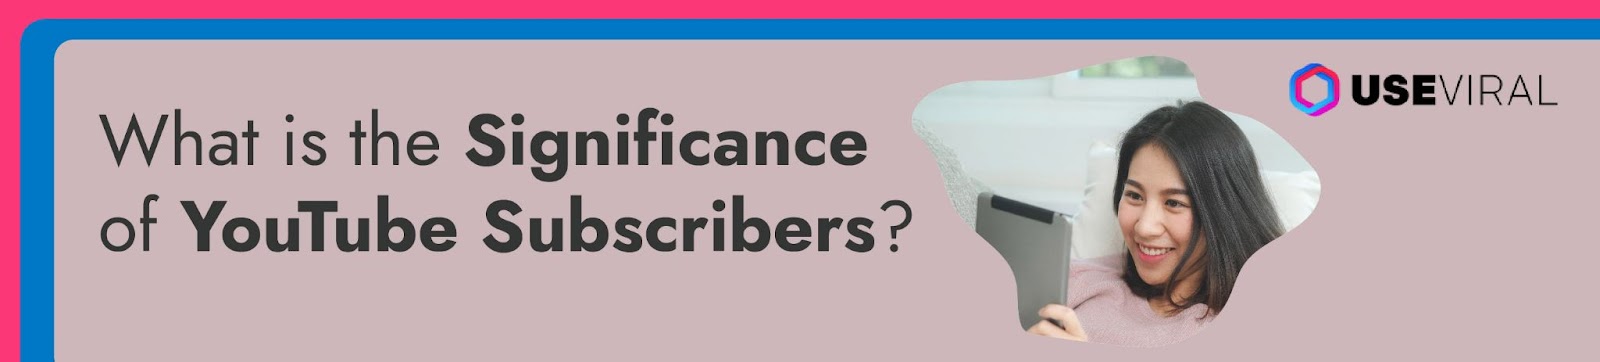 What is the Significance of YouTube Subscribers?